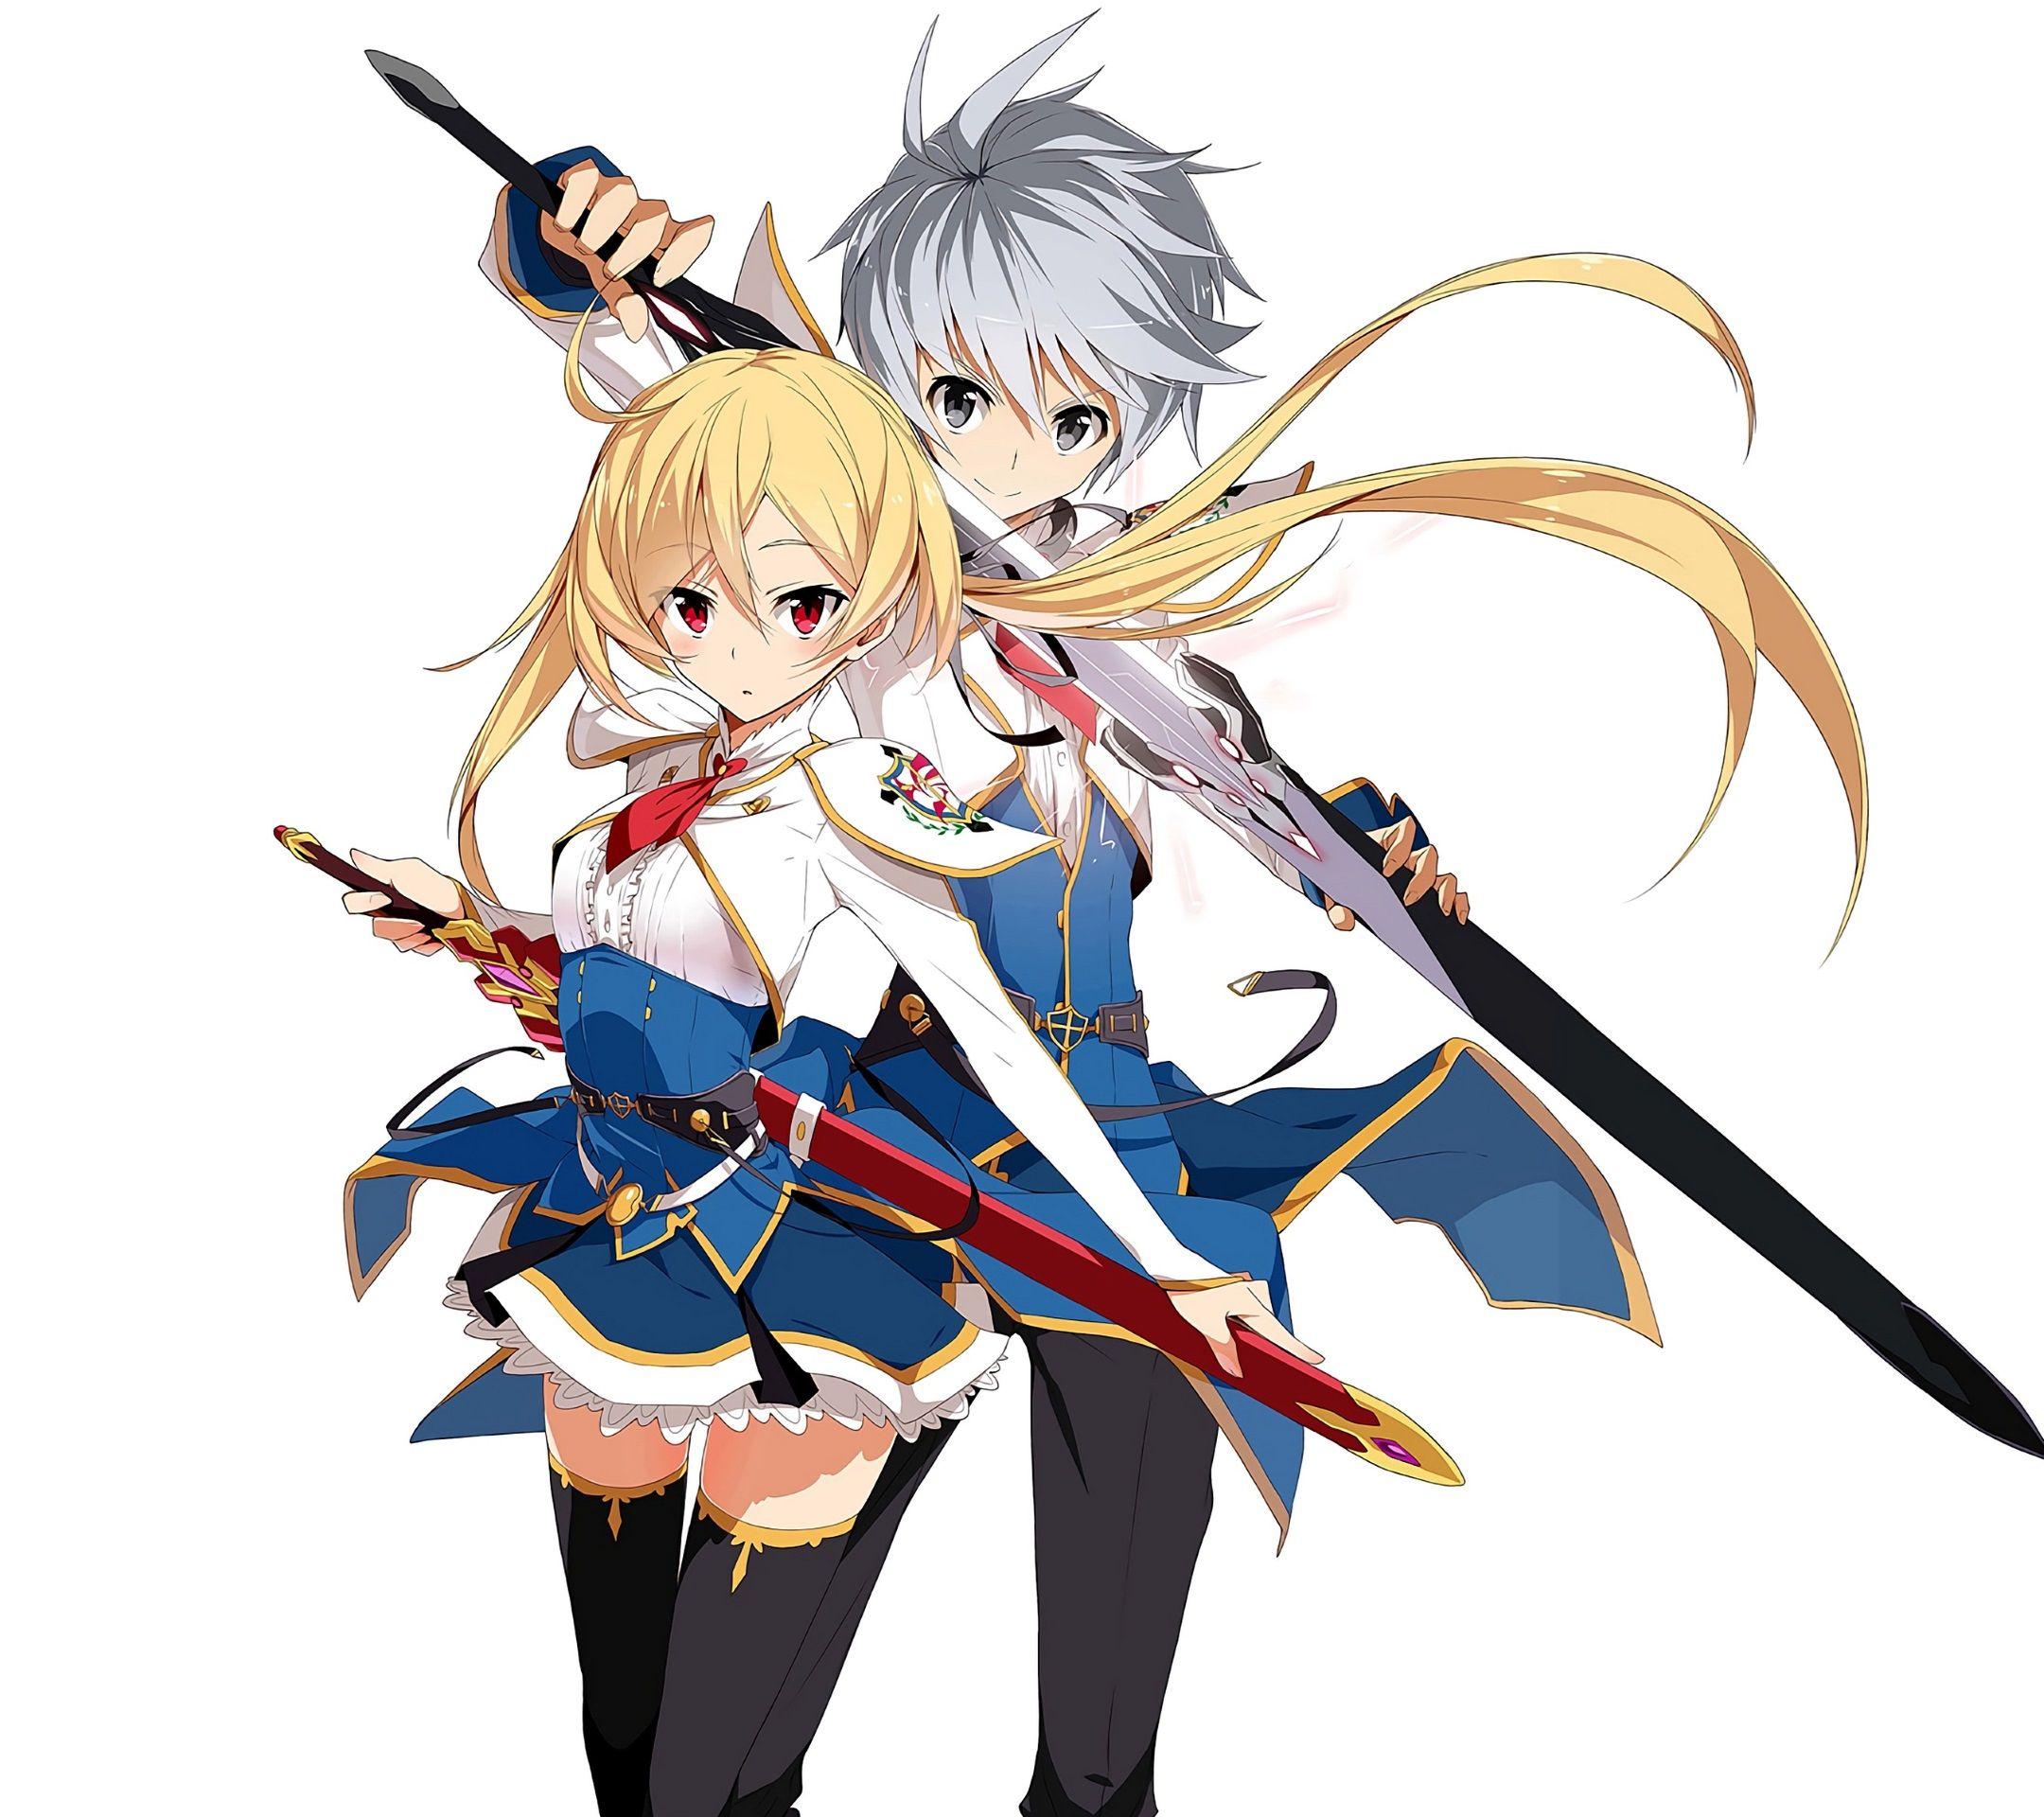 Undefeated Bahamut Chronicle wallpaper for iPhone and android